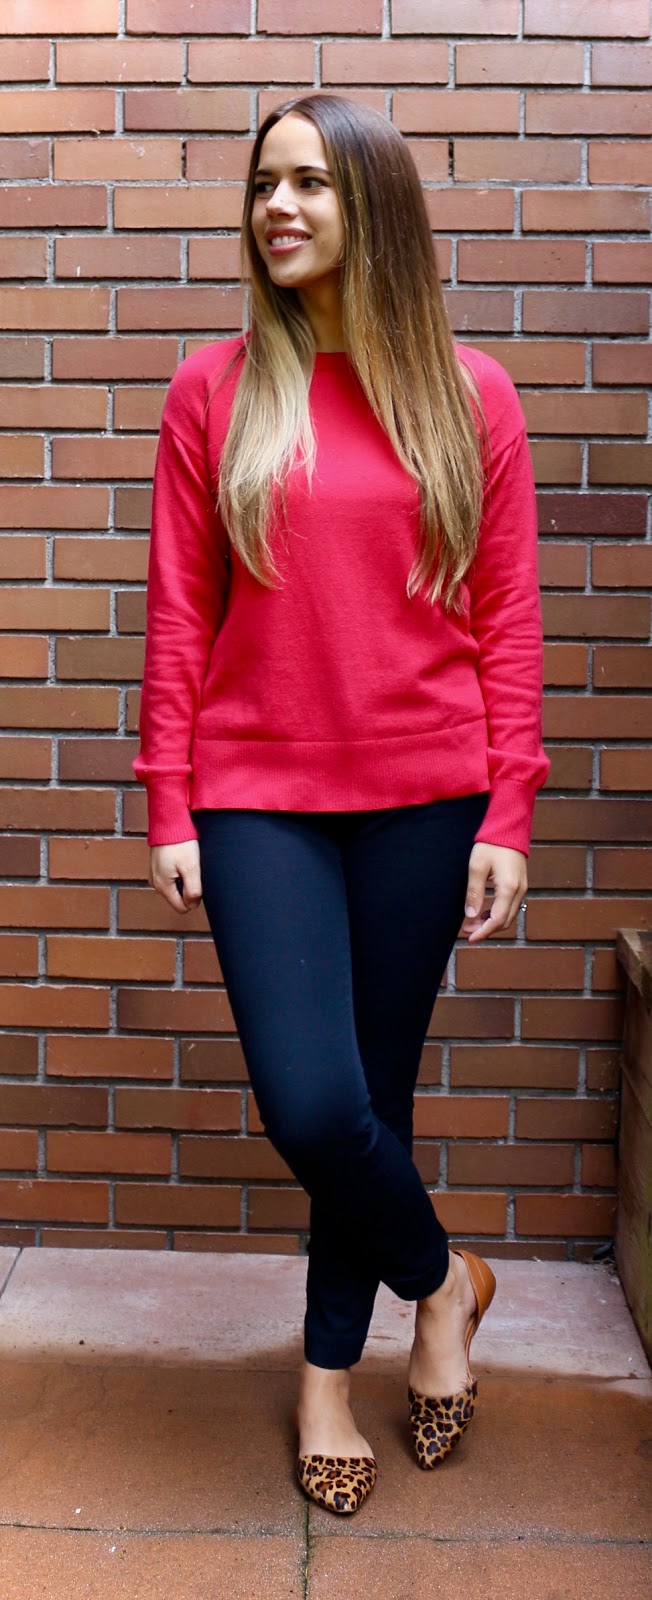 Jules in Flats - Red Sweater with Leopard Flats (Business Casual Fall Workwear on a Budget) 